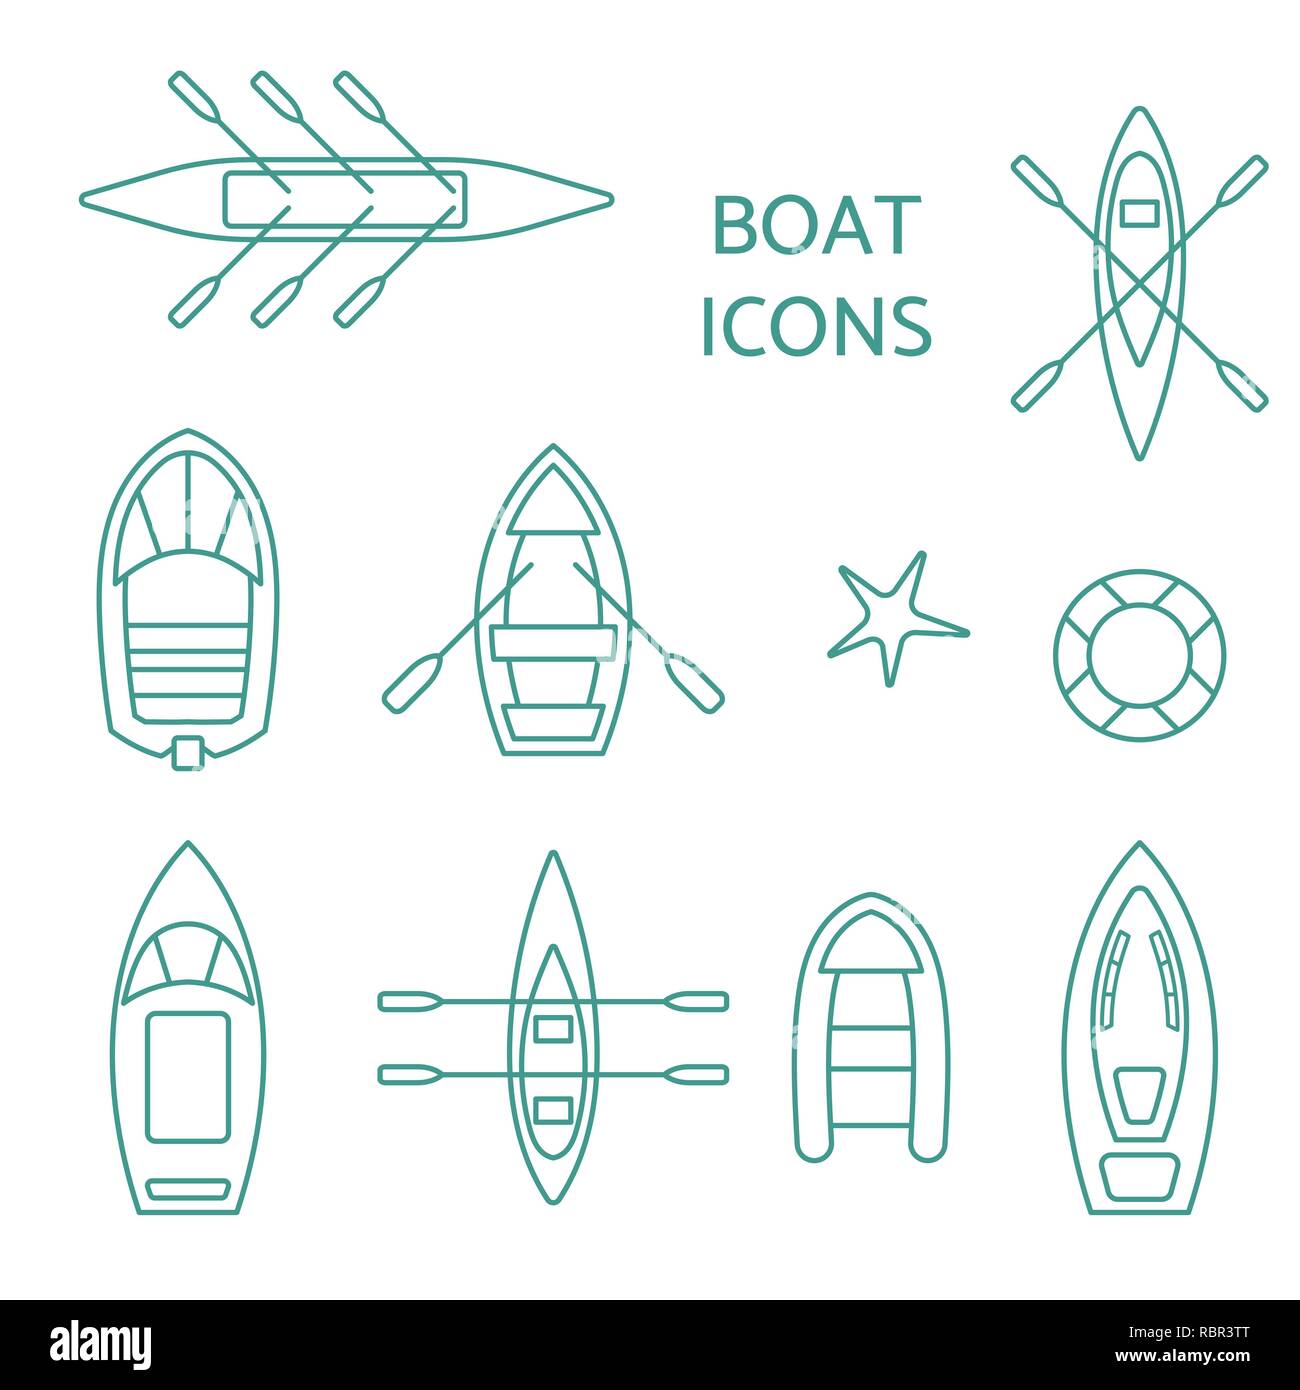 Boat icons outline set. Stock Vector